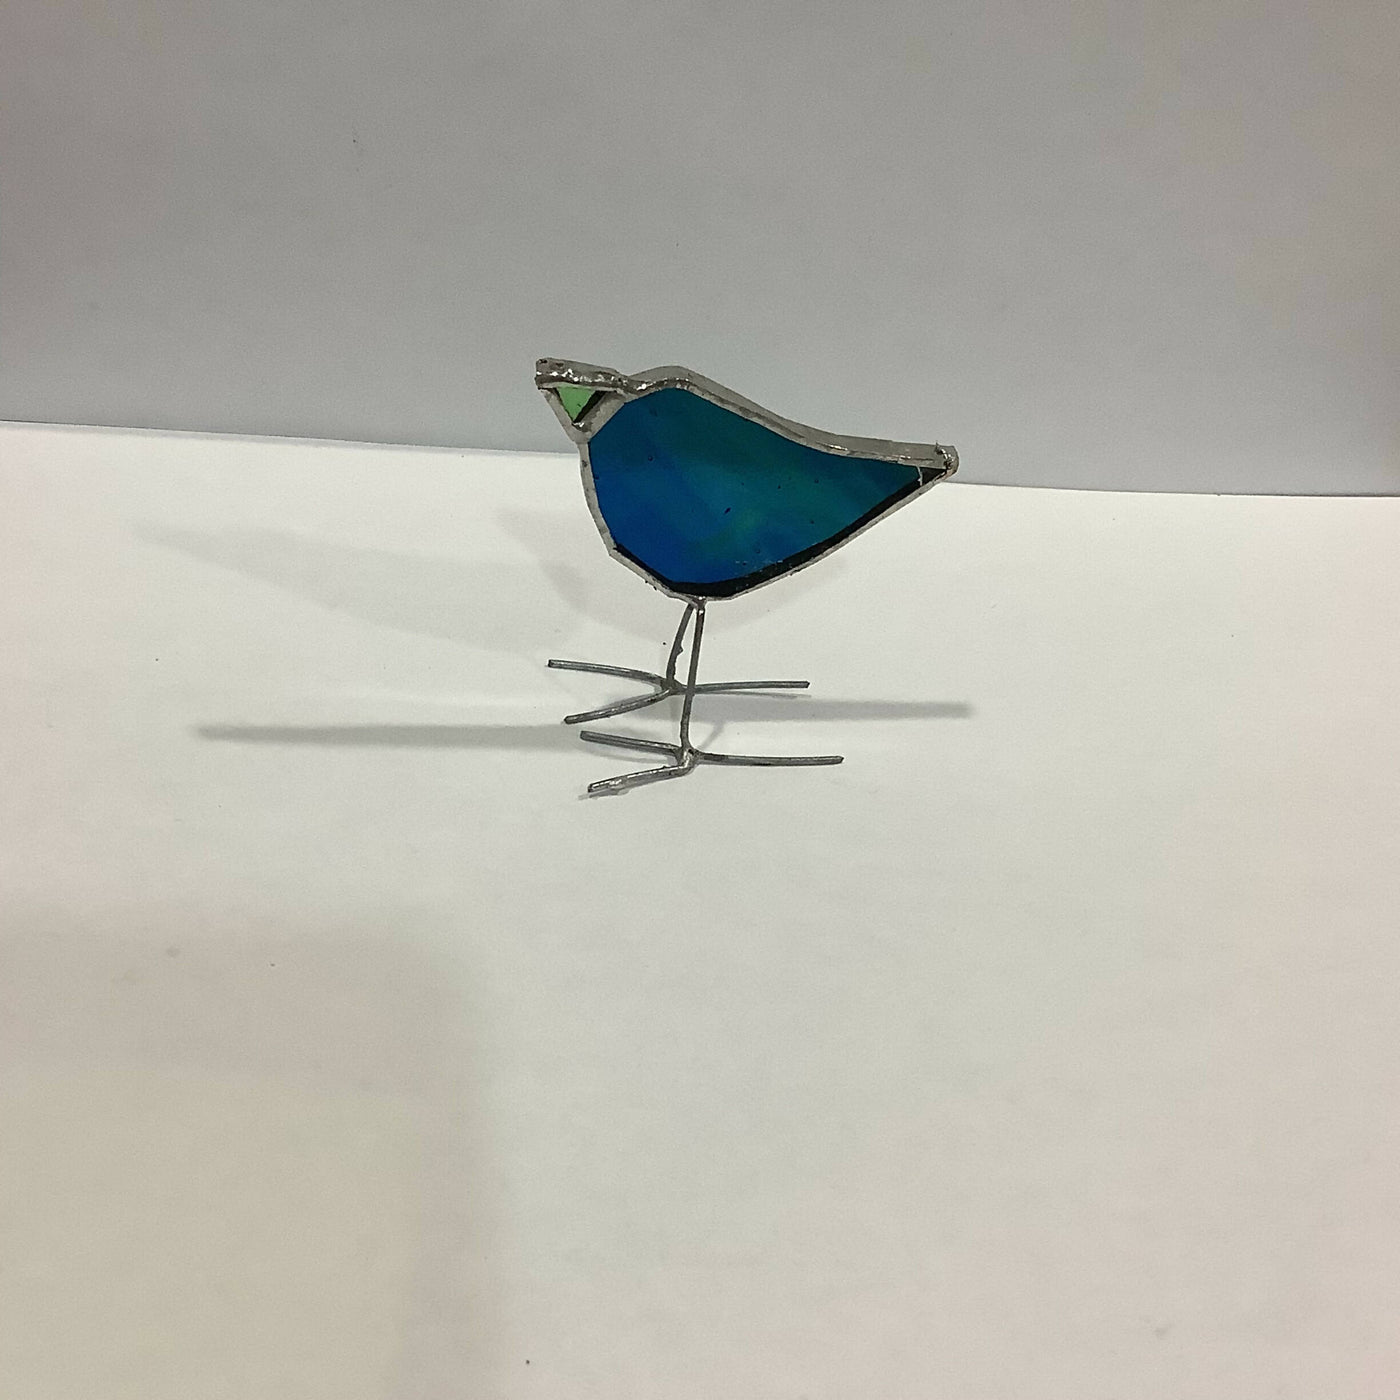 Standing Stained Glass Bird